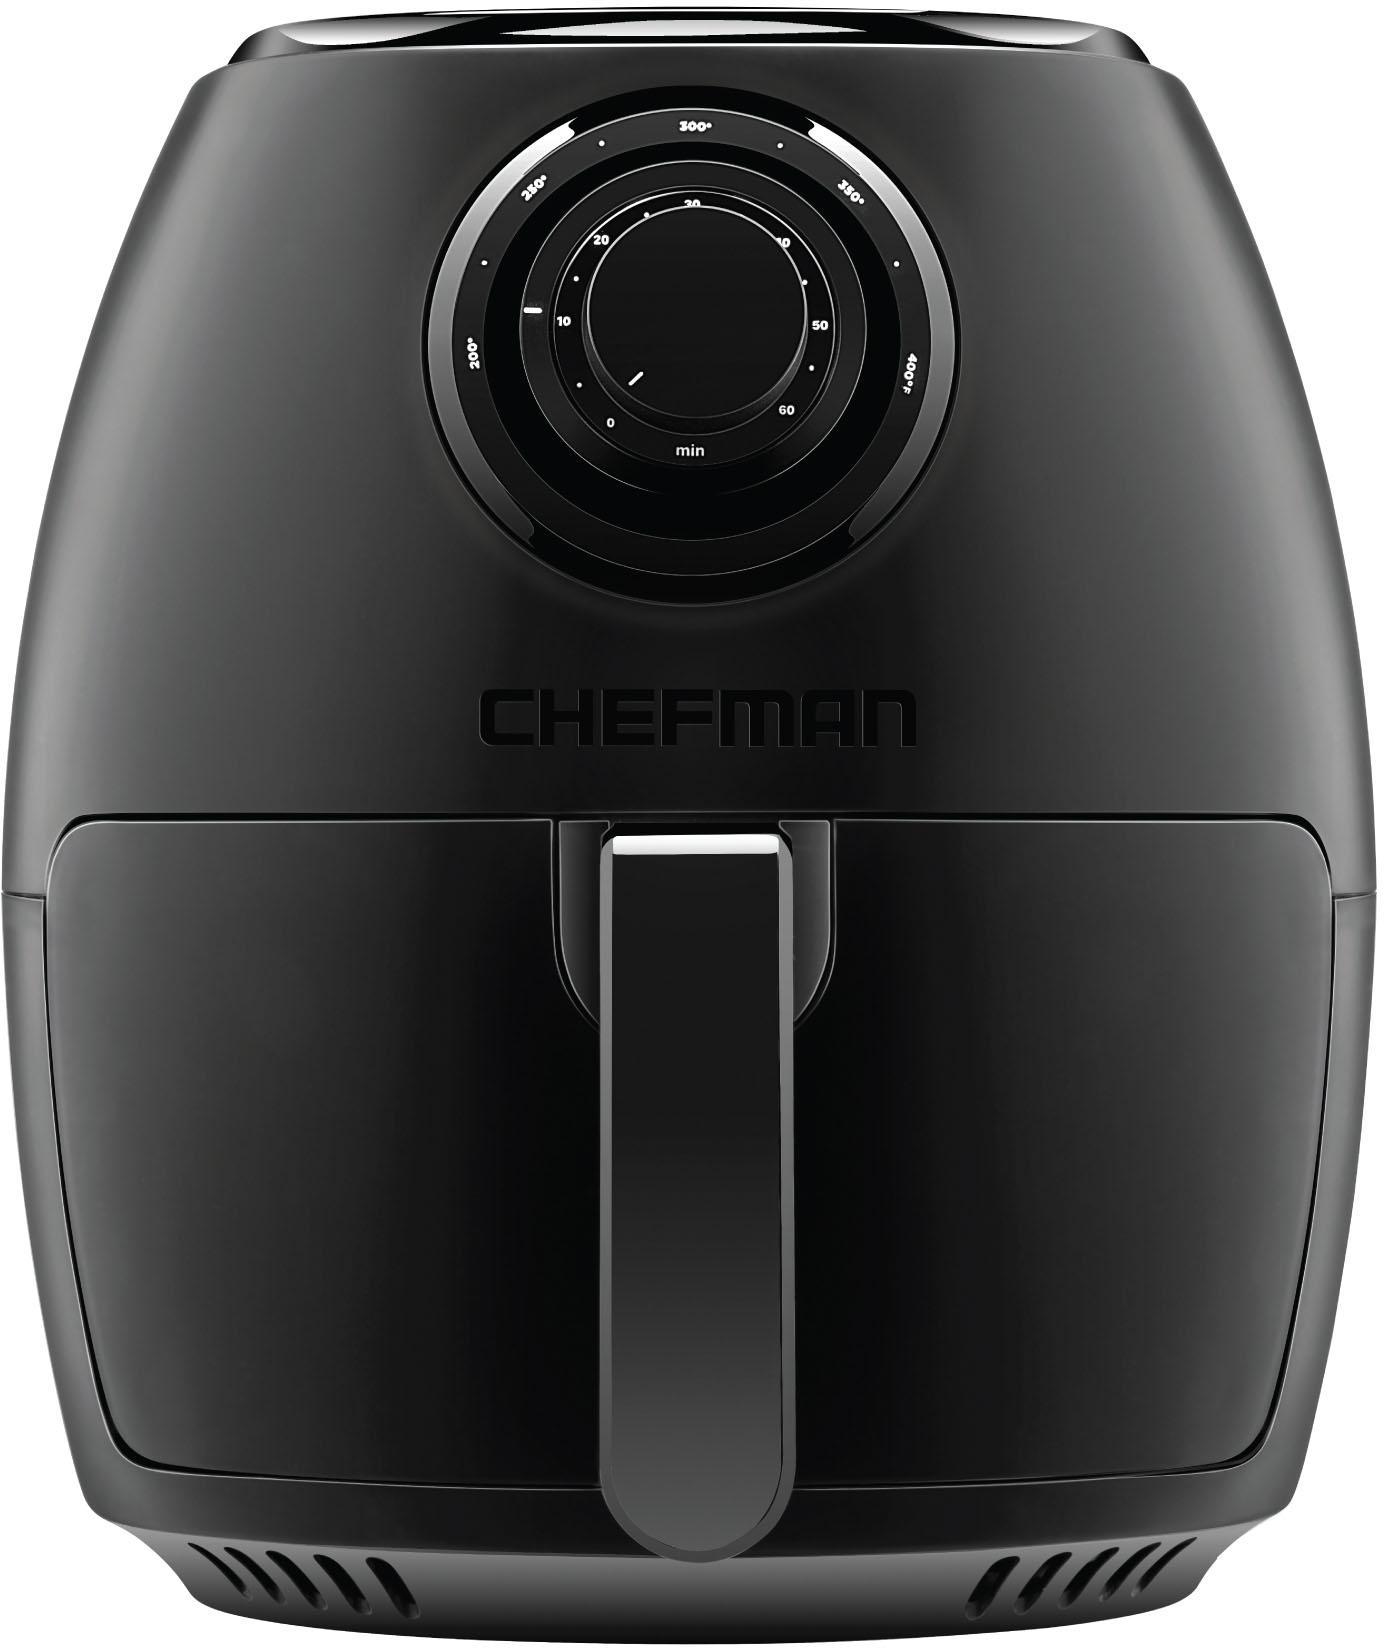 Zoom in on Angle Zoom. Chefman TurboFry 3.6 Qt. Analog Air Fryer, Dual Dial Control - Black.